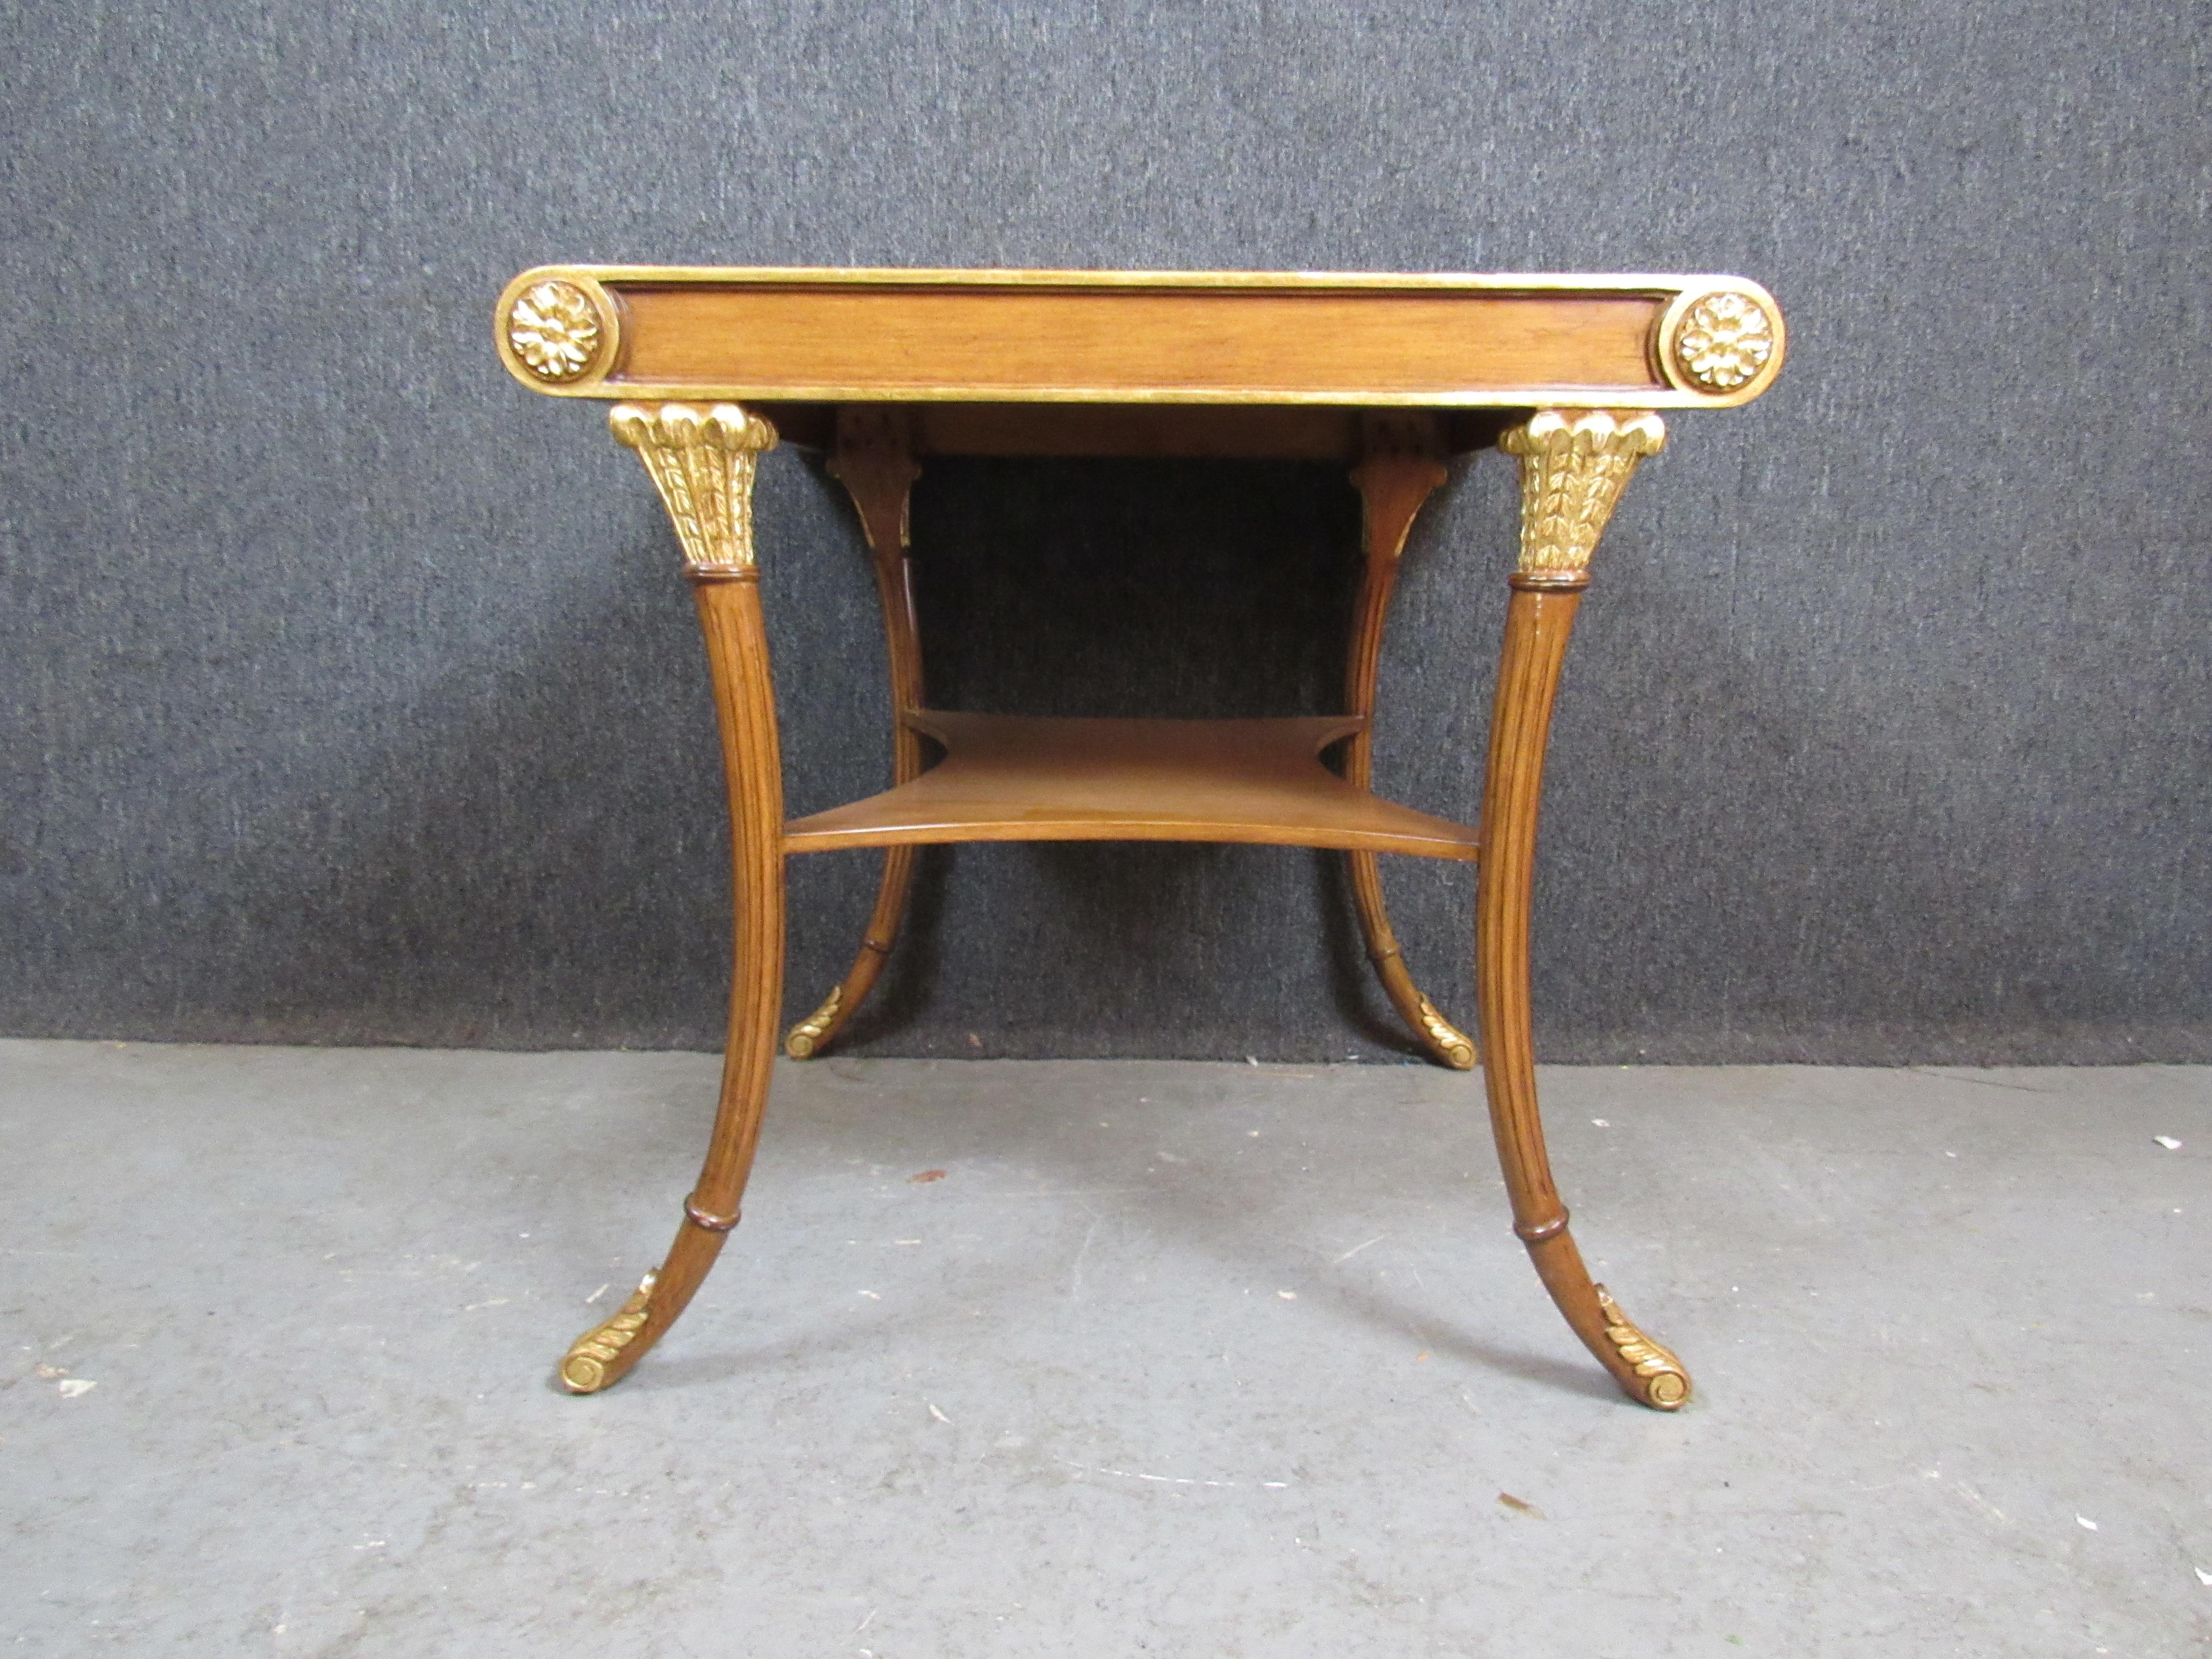 Elevate any space with a sense of history and luxury with this exquisite Neo-Classical Revival mahogany table. Beautifully curved legs are adorned with gilded, feathered feet while a deeply curved lower tier offers storage or display space. A